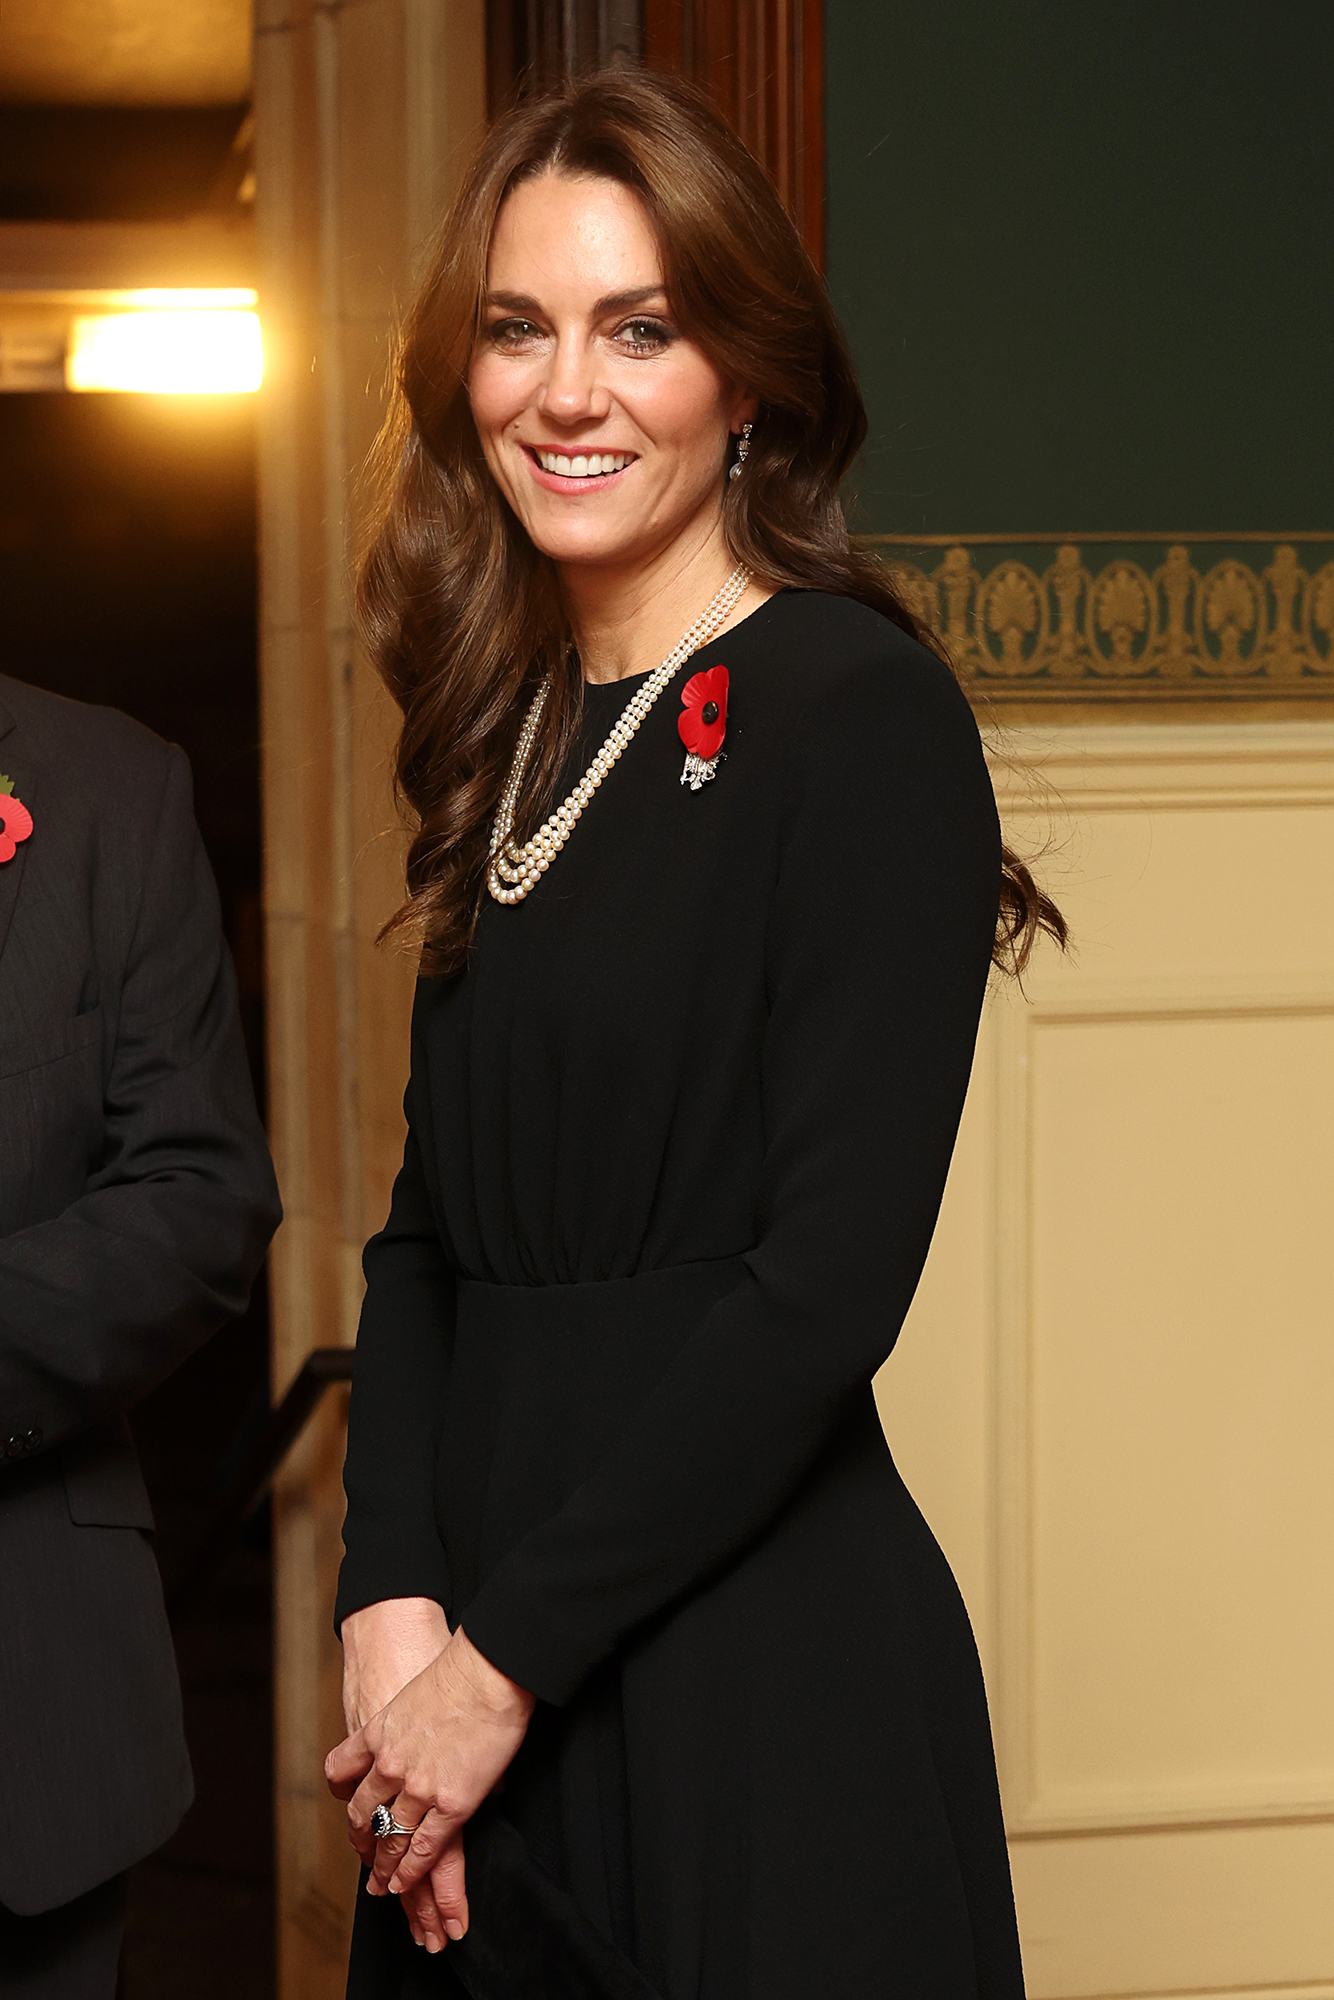 Kate Middleton Honors Queen Elizabeth on Remembrance Day With Pearls